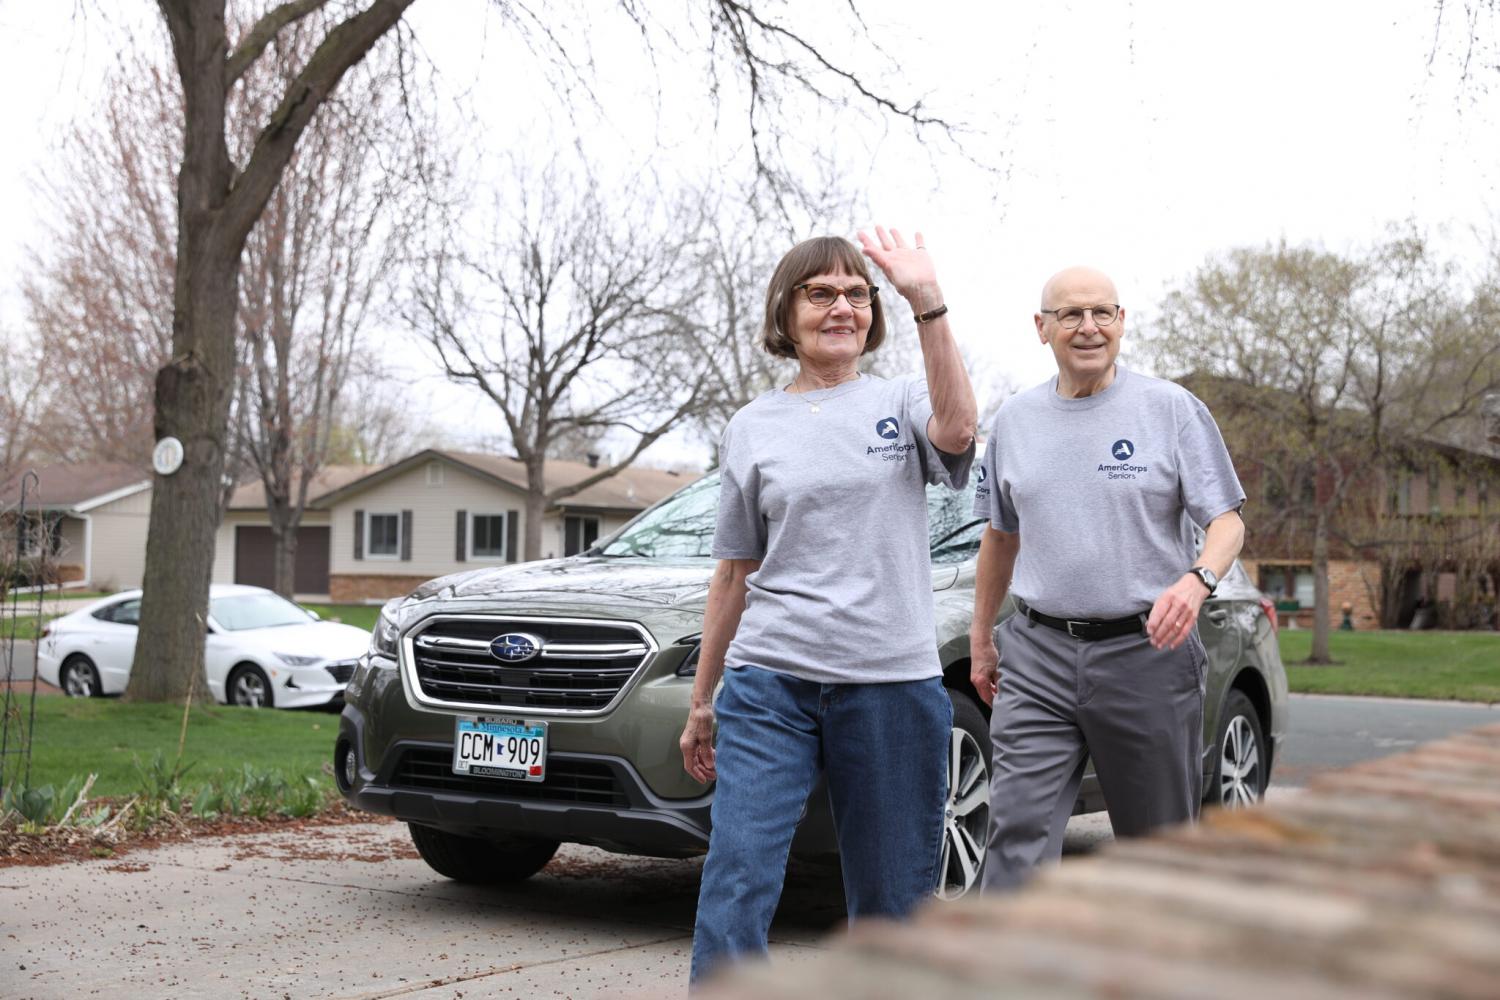 AmeriCorps Seniors Bill and Barb deliver meals to their neighbors 